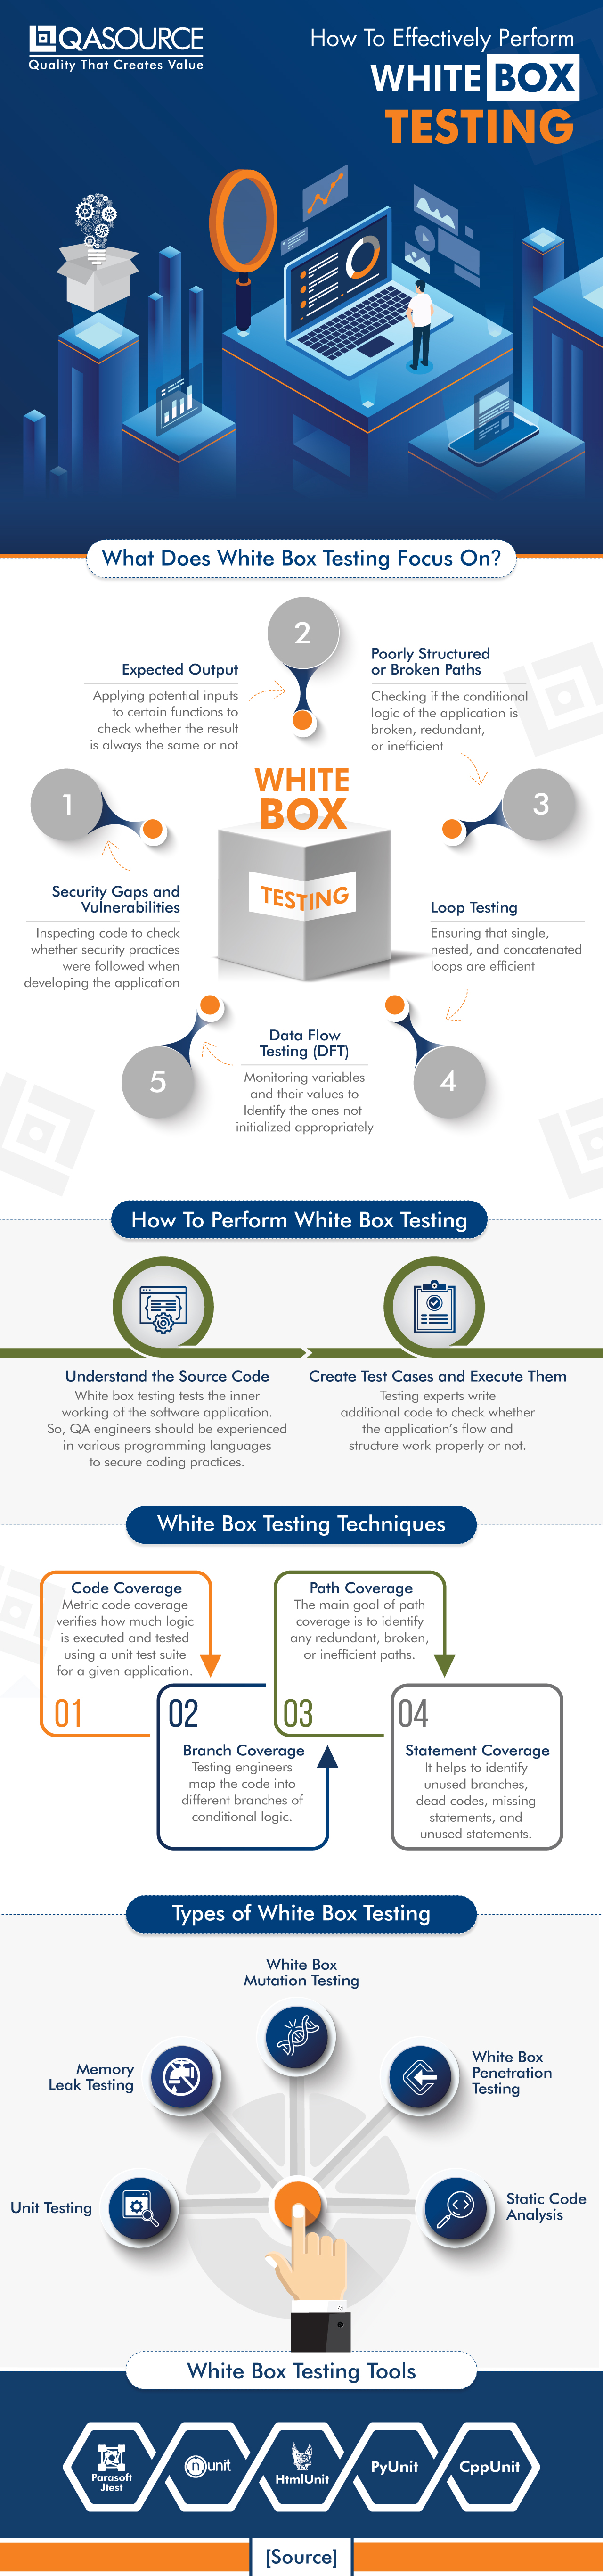 How To Effectively Perform White Box Testing